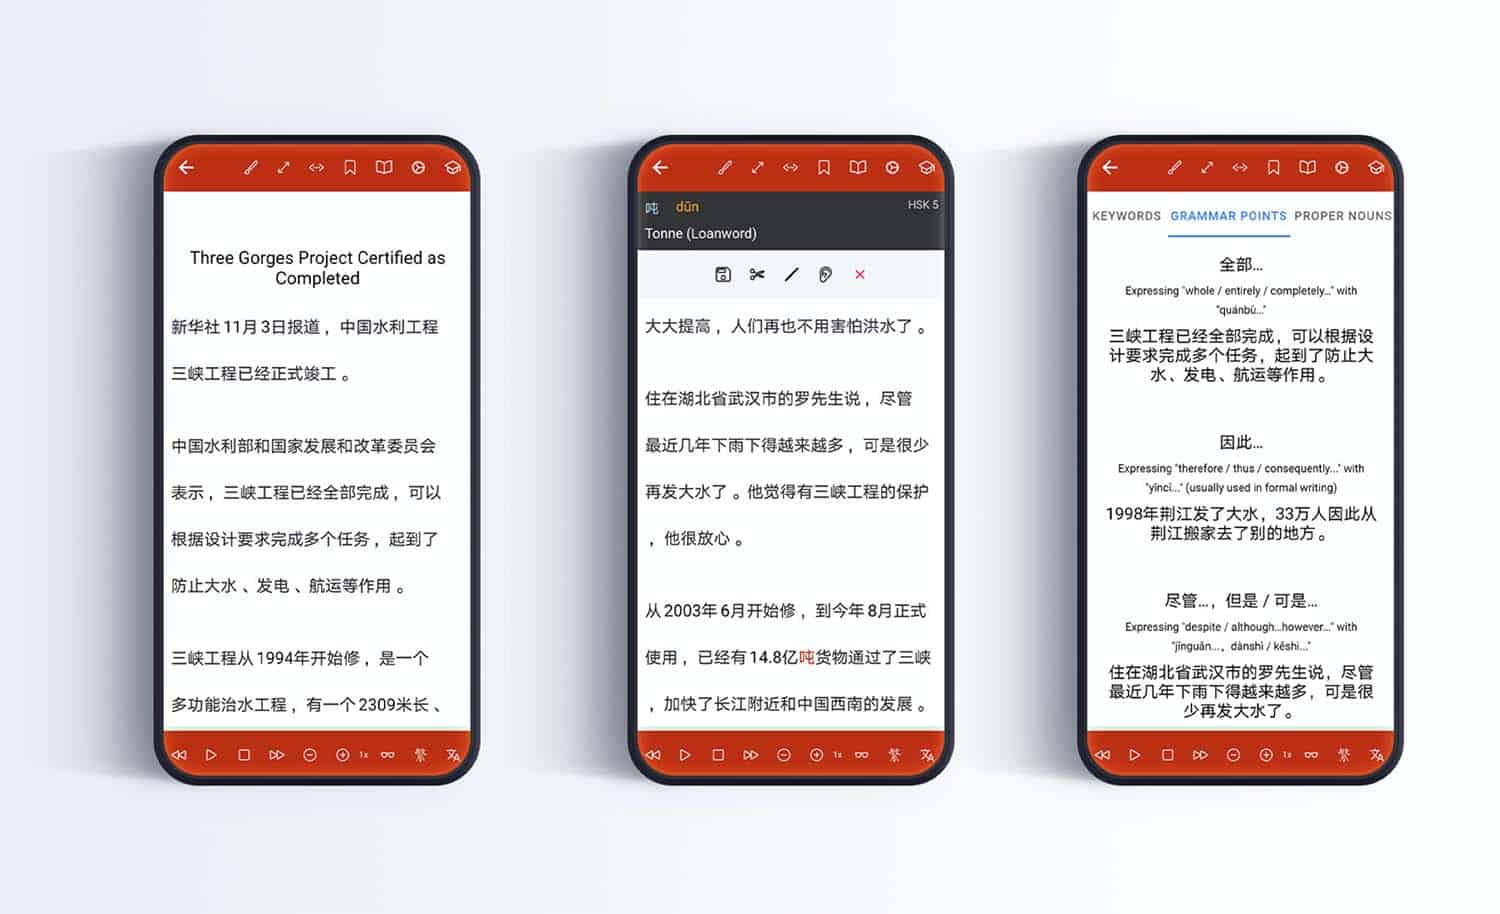 The Chairman's Bao app review